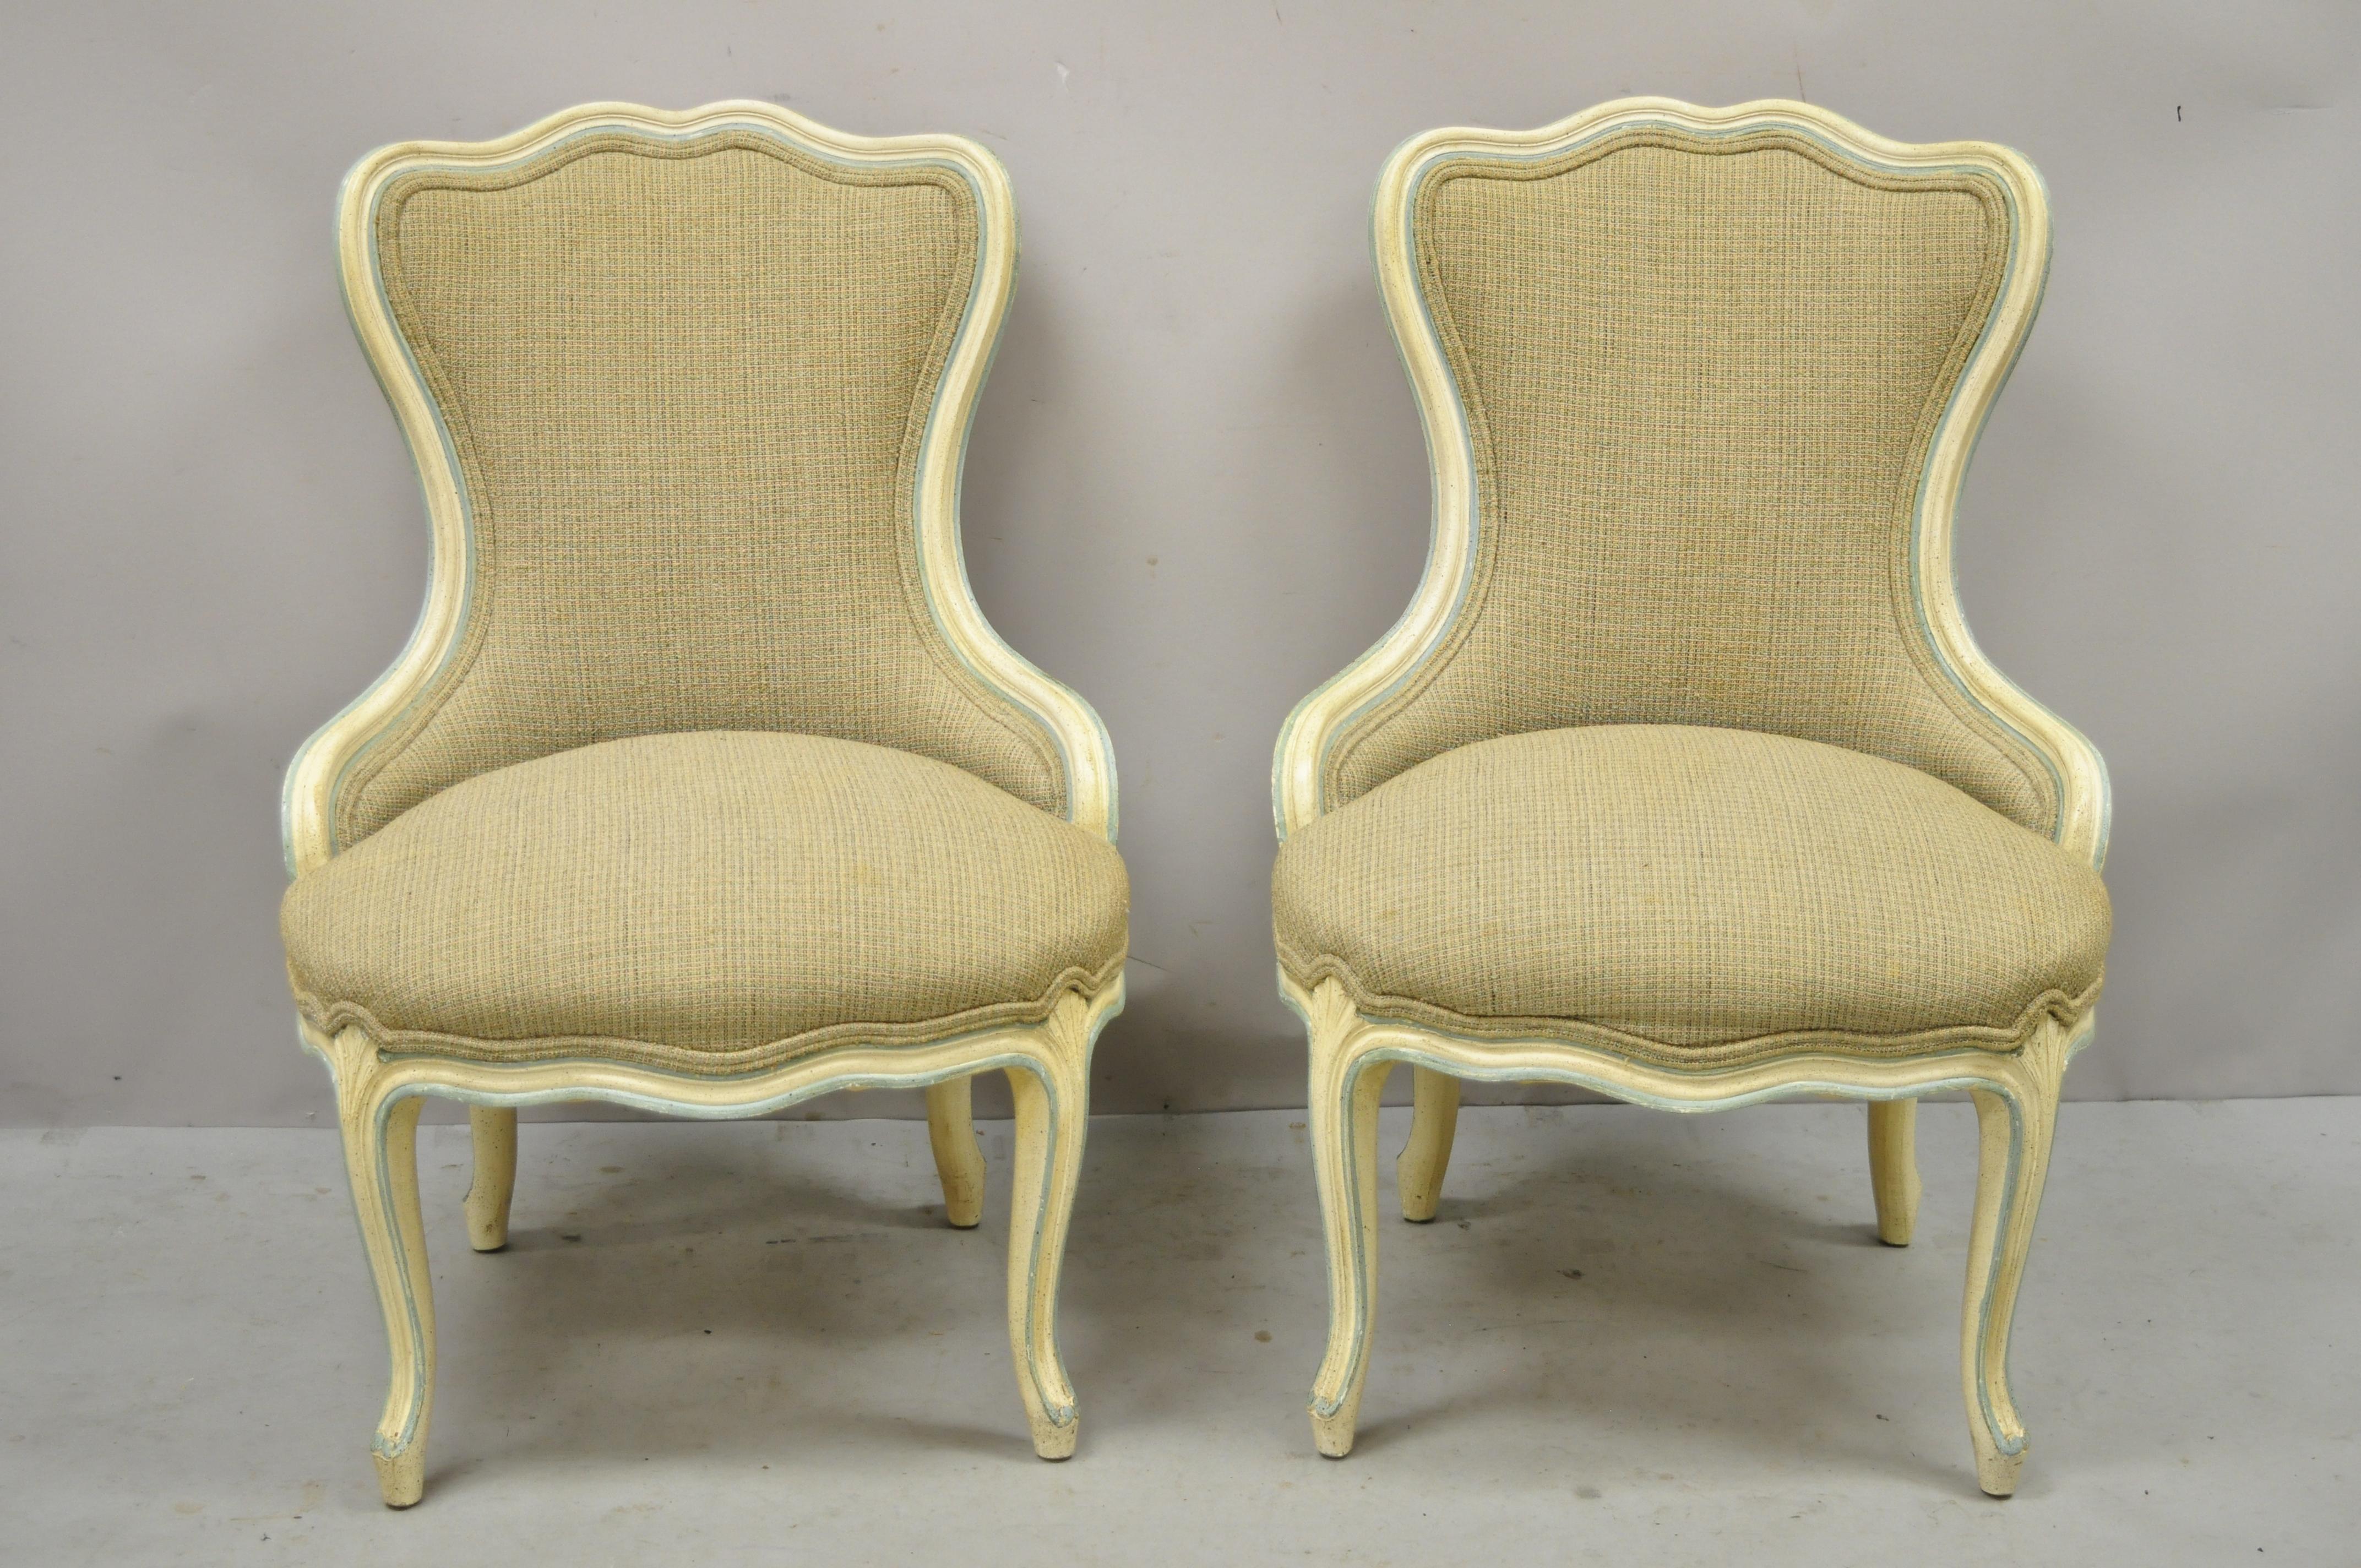 French Provincial Louis XV Cream Blue Hiprest Boudoir Slipper Chairs, a Pair For Sale 3